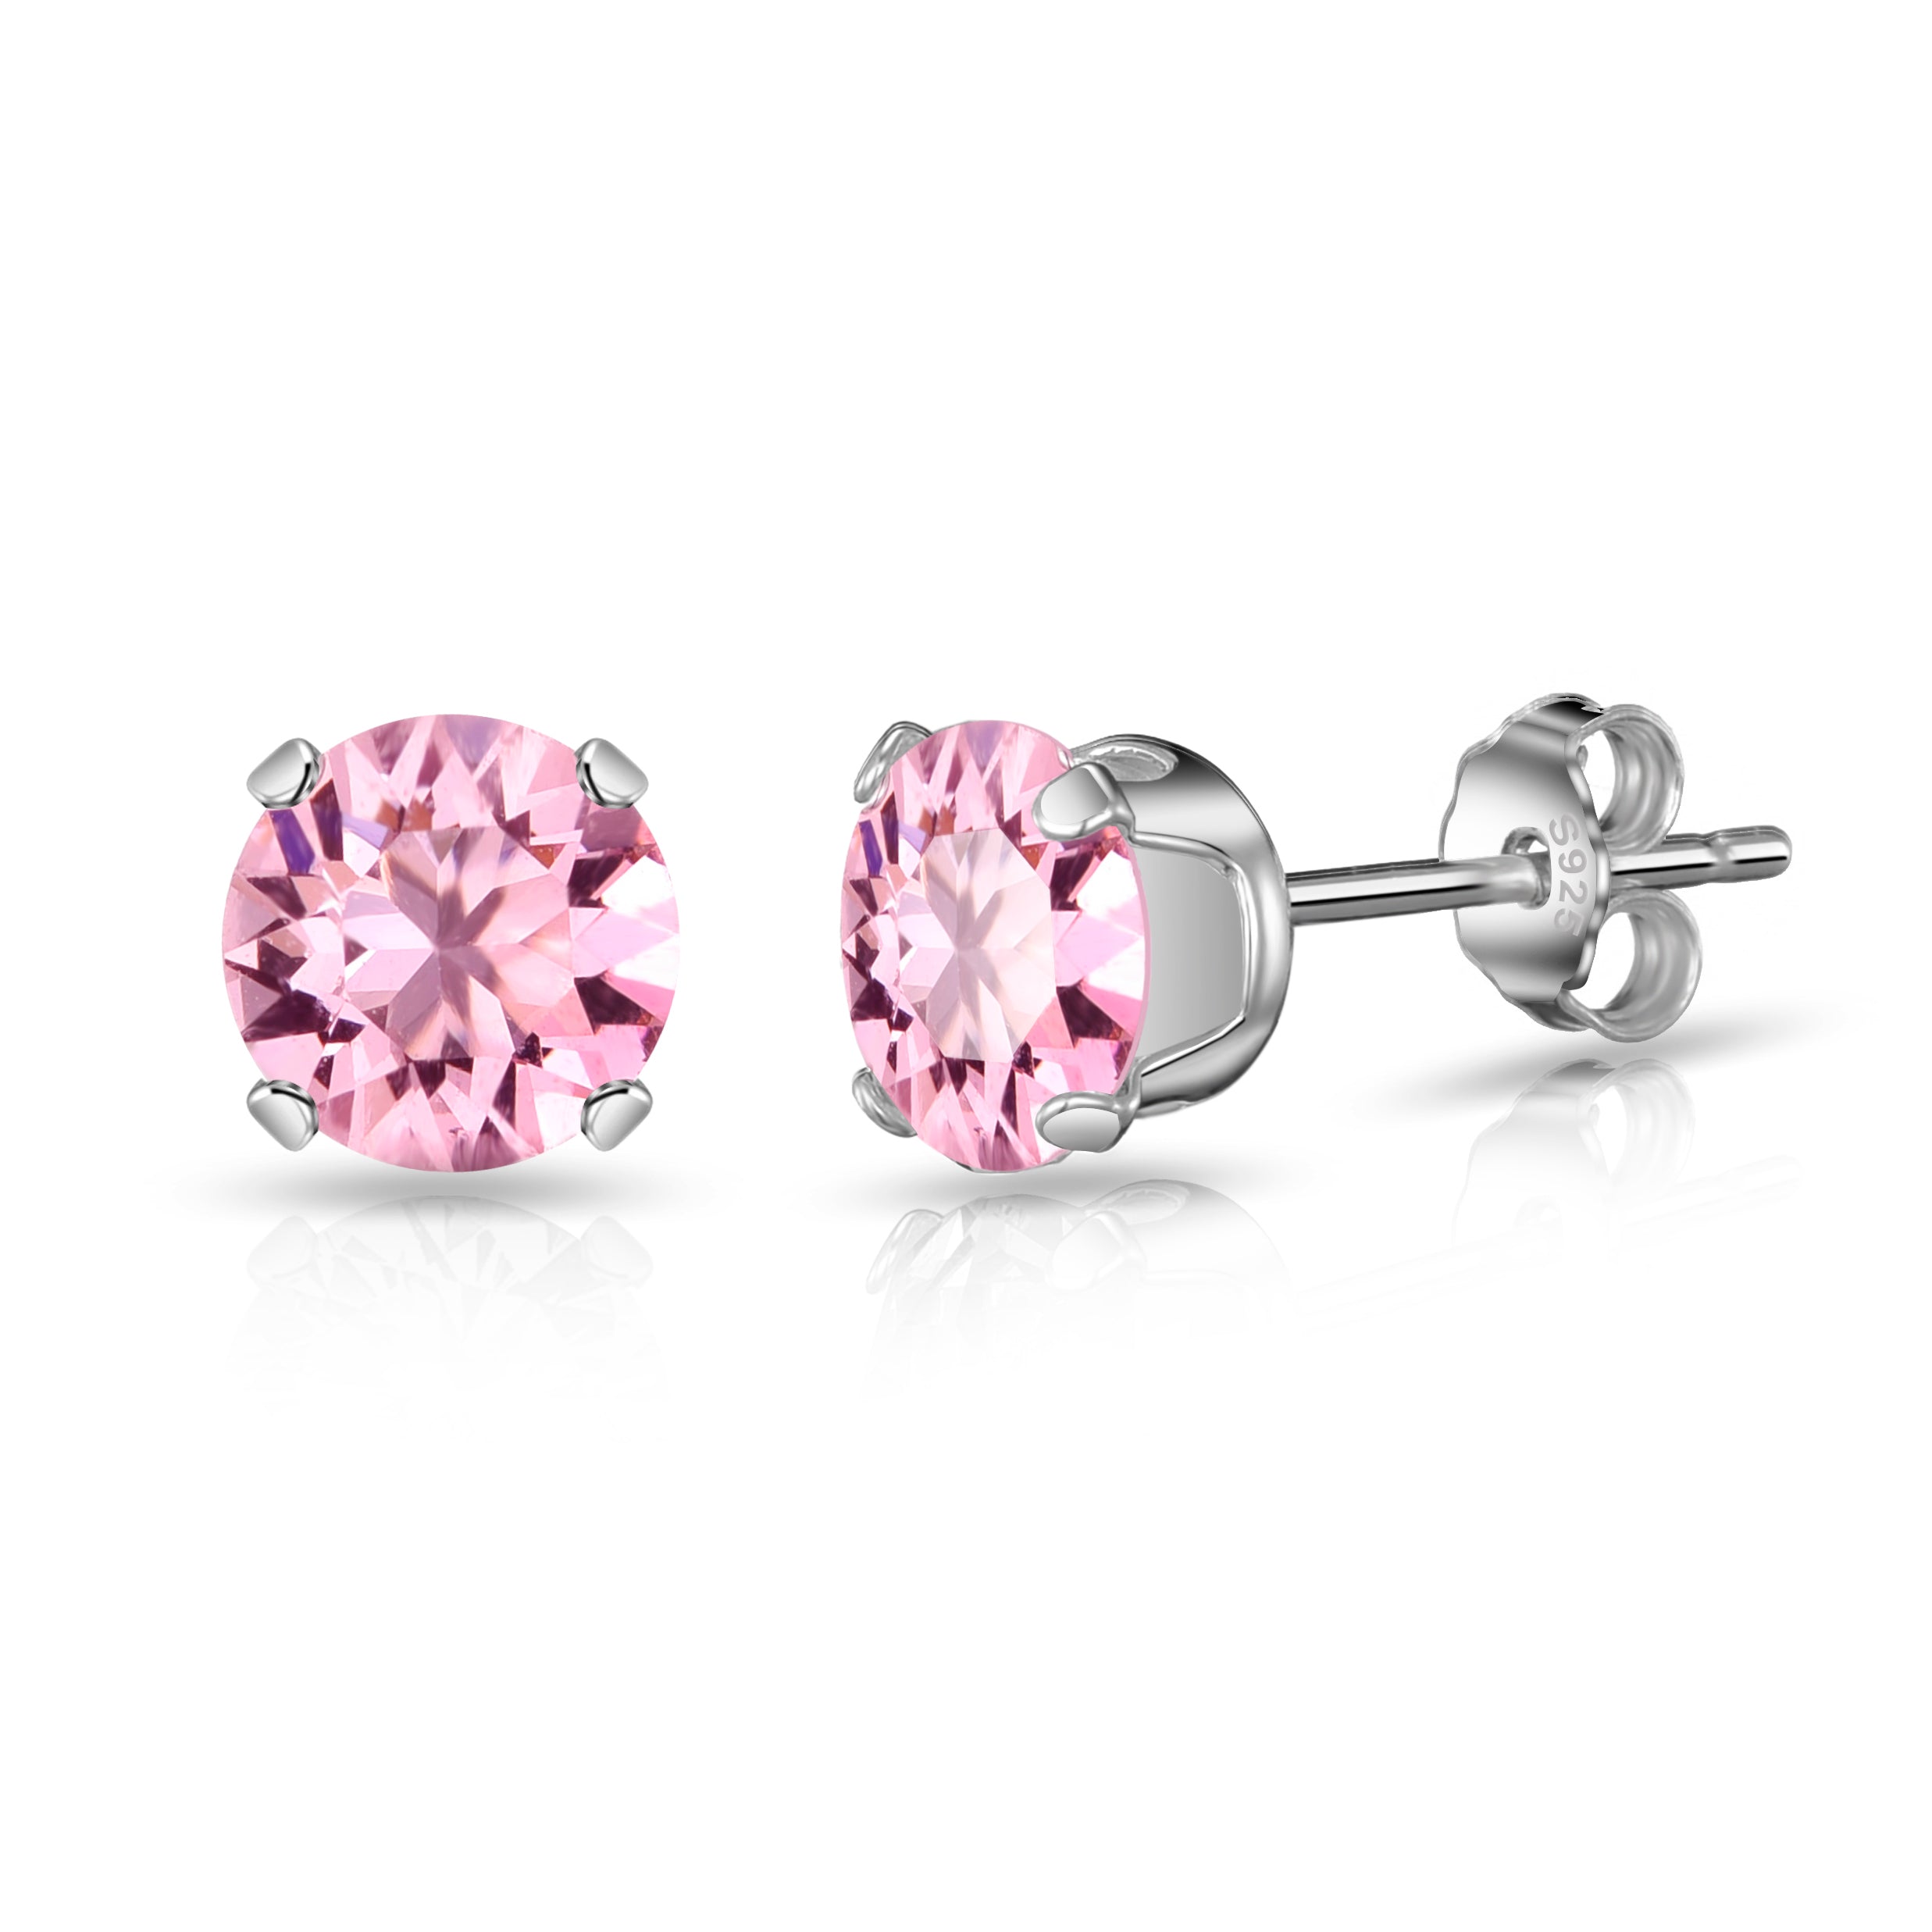 Sterling Silver Light Rose Earrings Created with Zircondia® Crystals by Philip Jones Jewellery